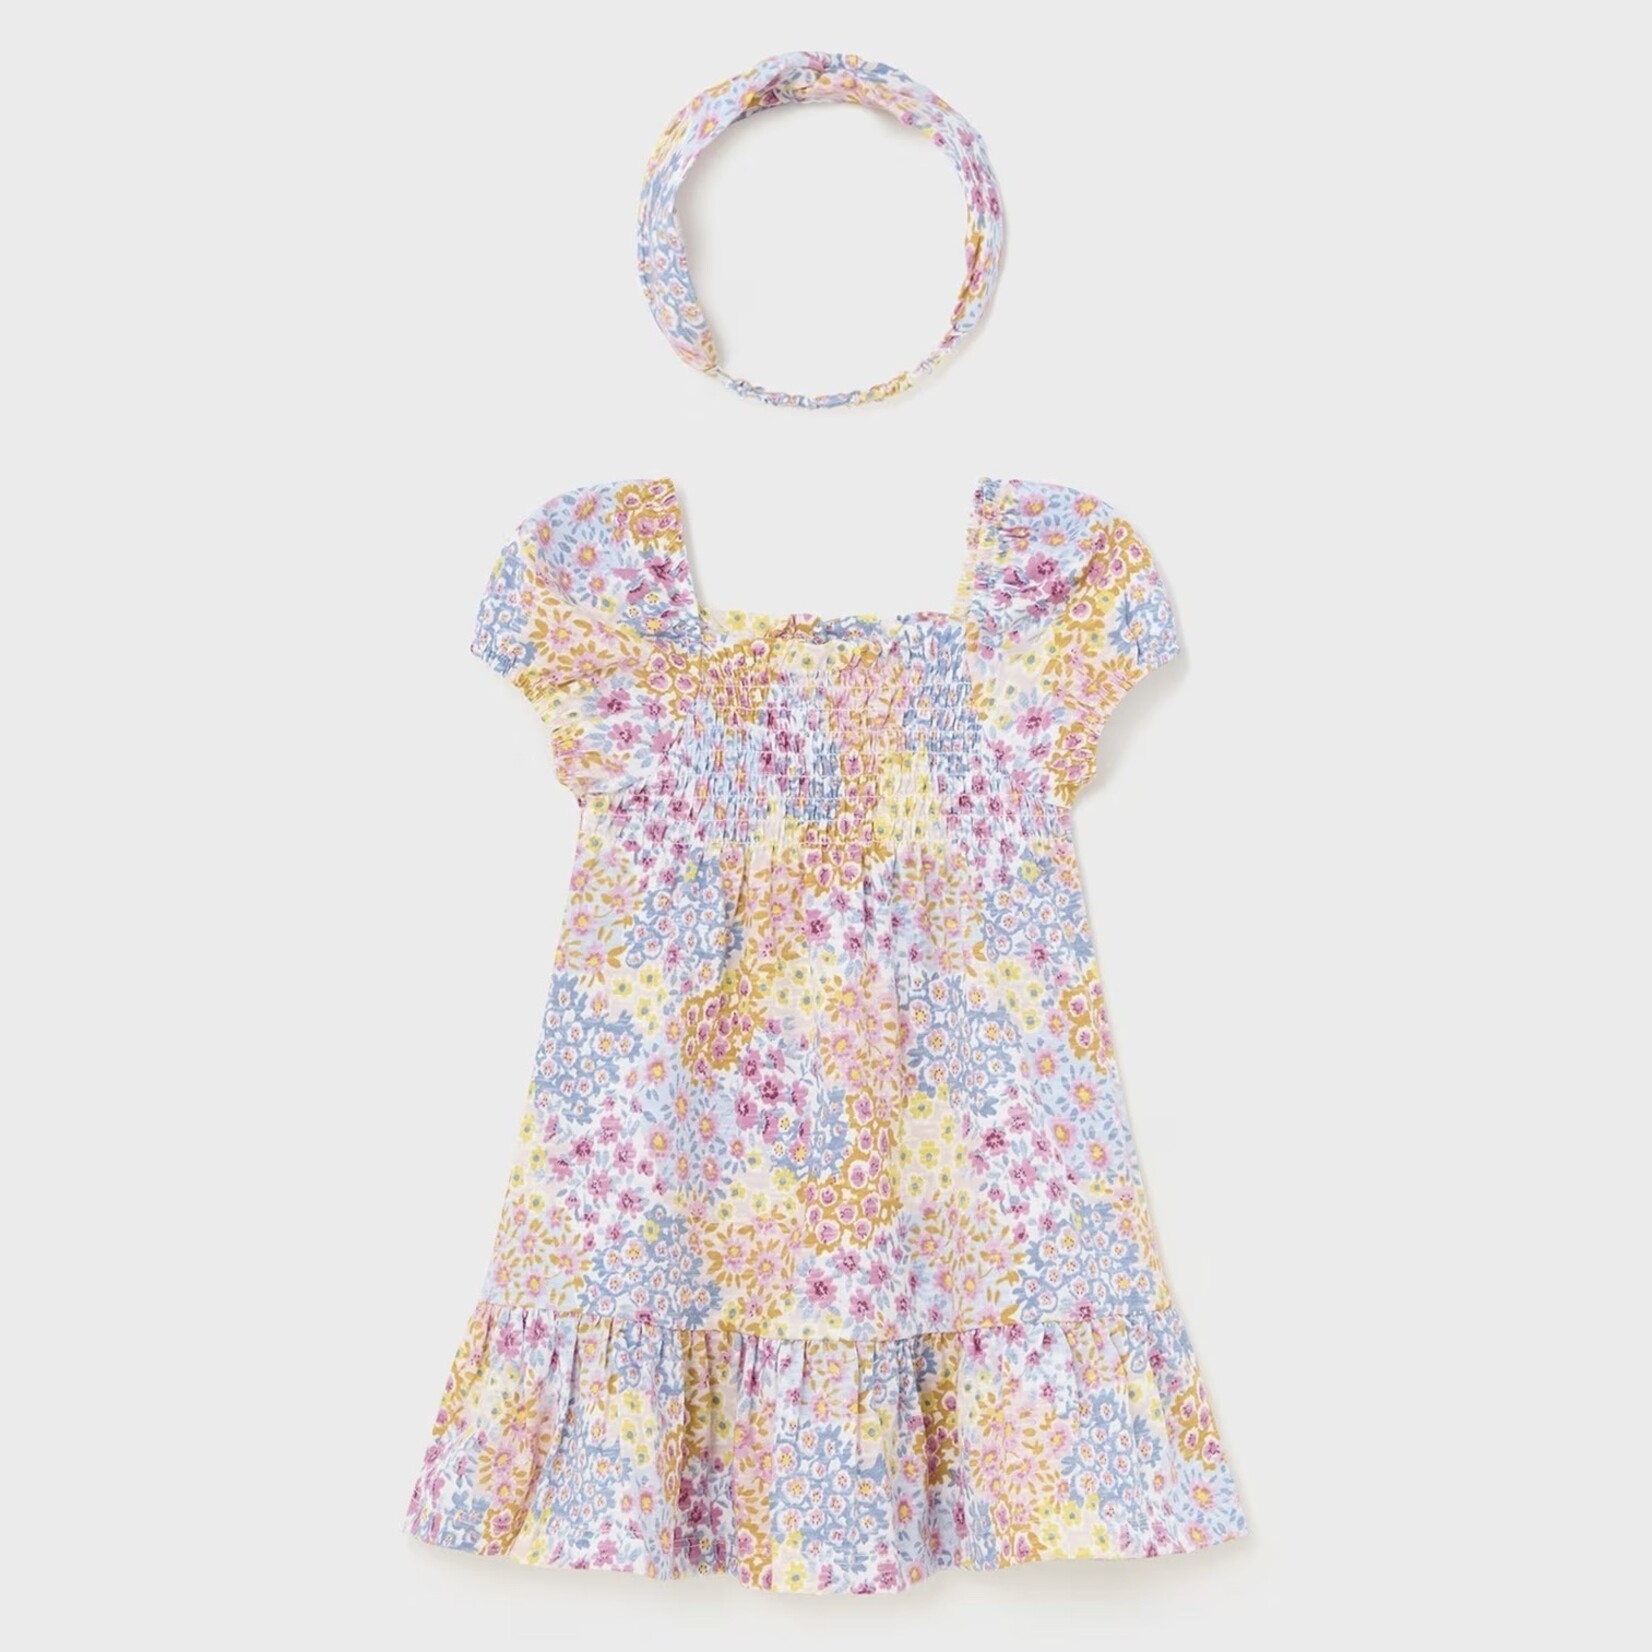 Mayoral Mayoral - Floral Dress With Headband